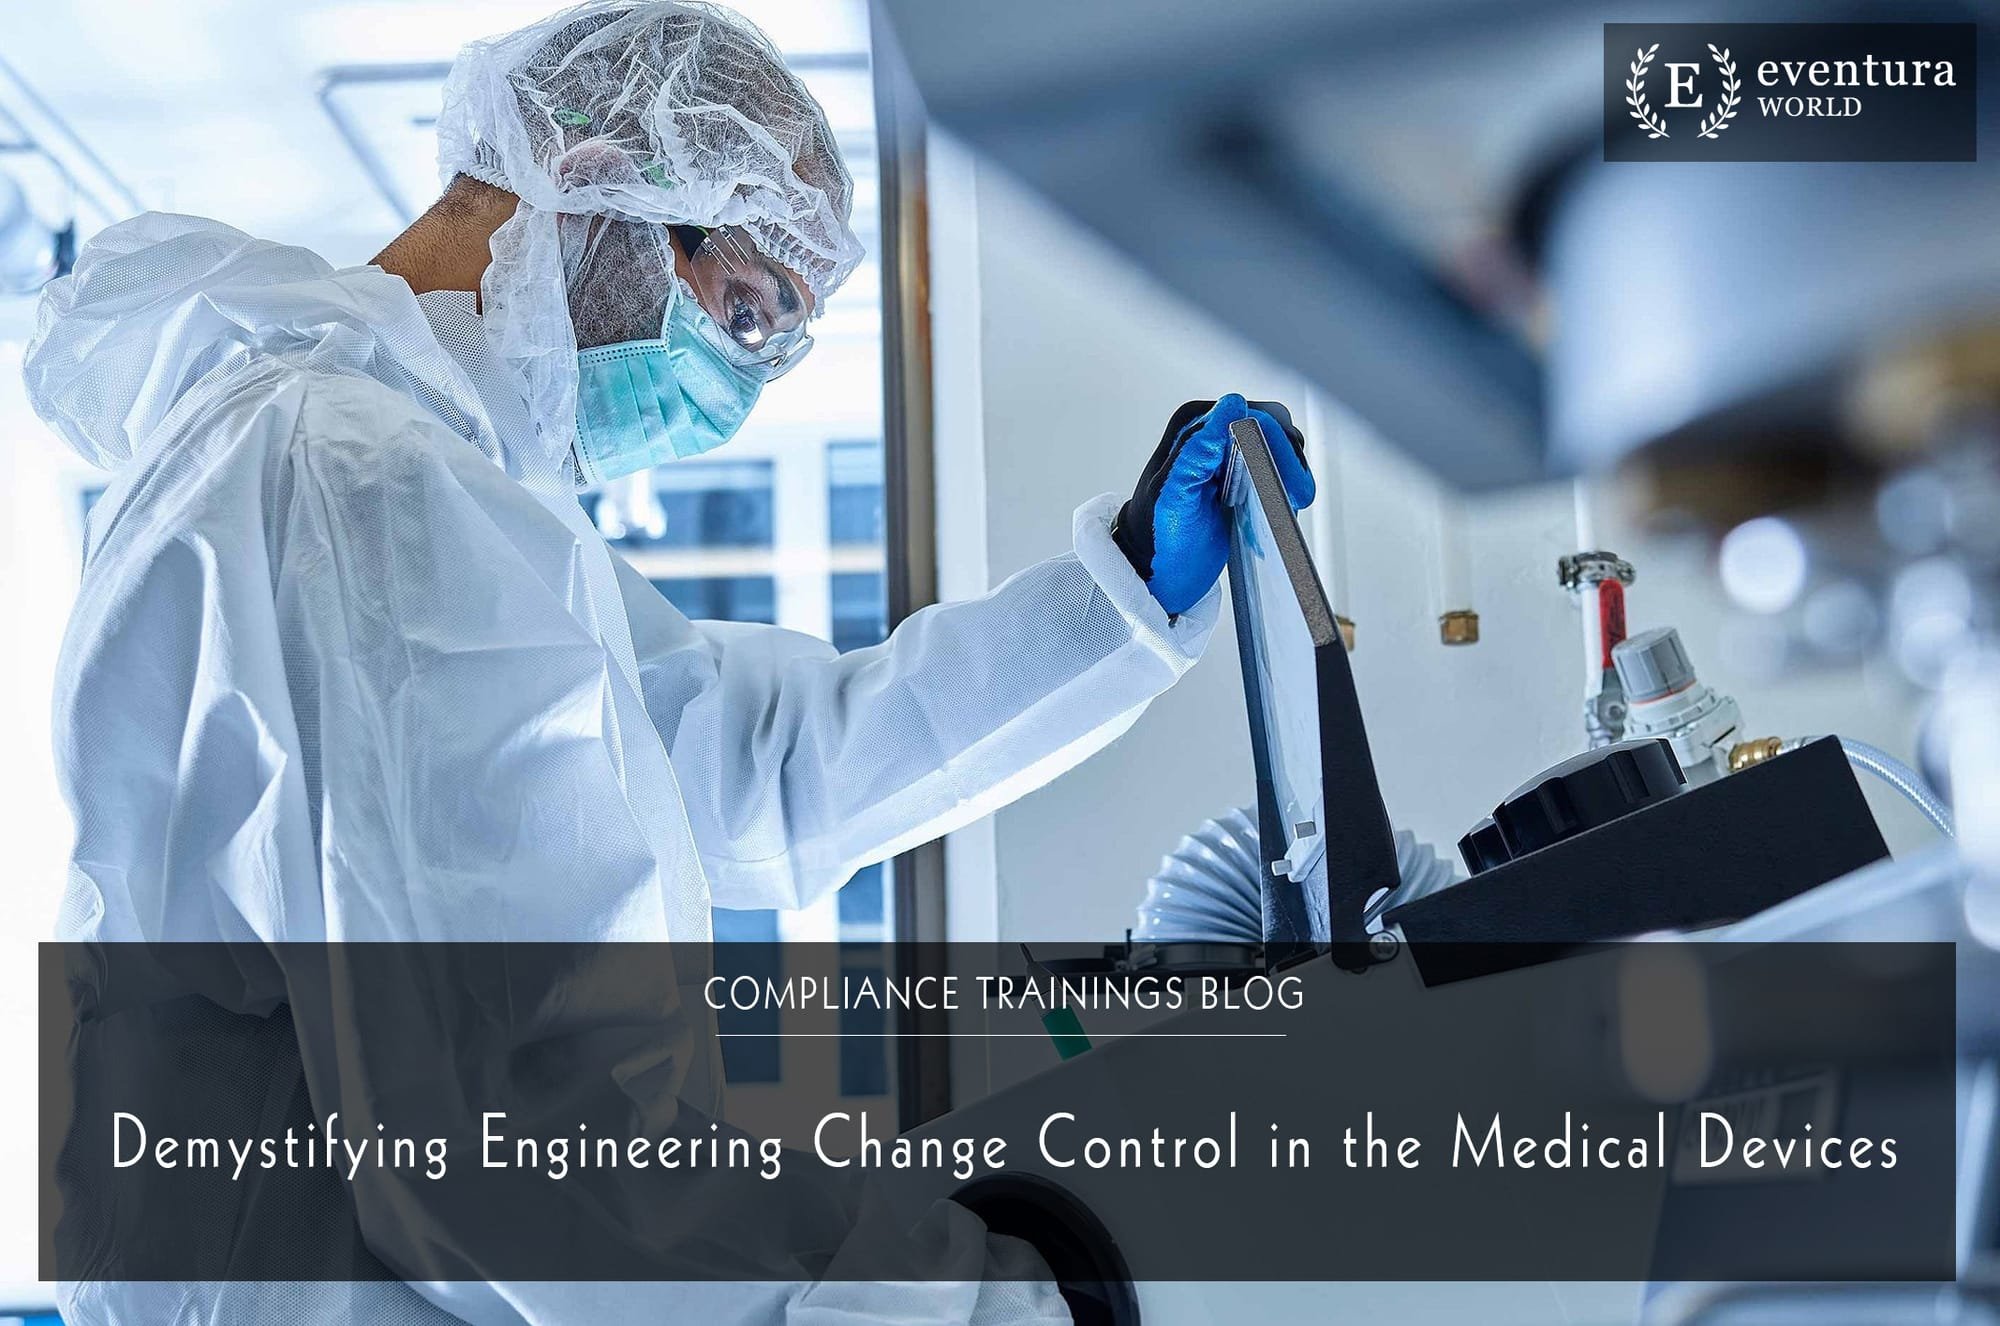 Demystifying Engineering Change Control in the Medical Devices